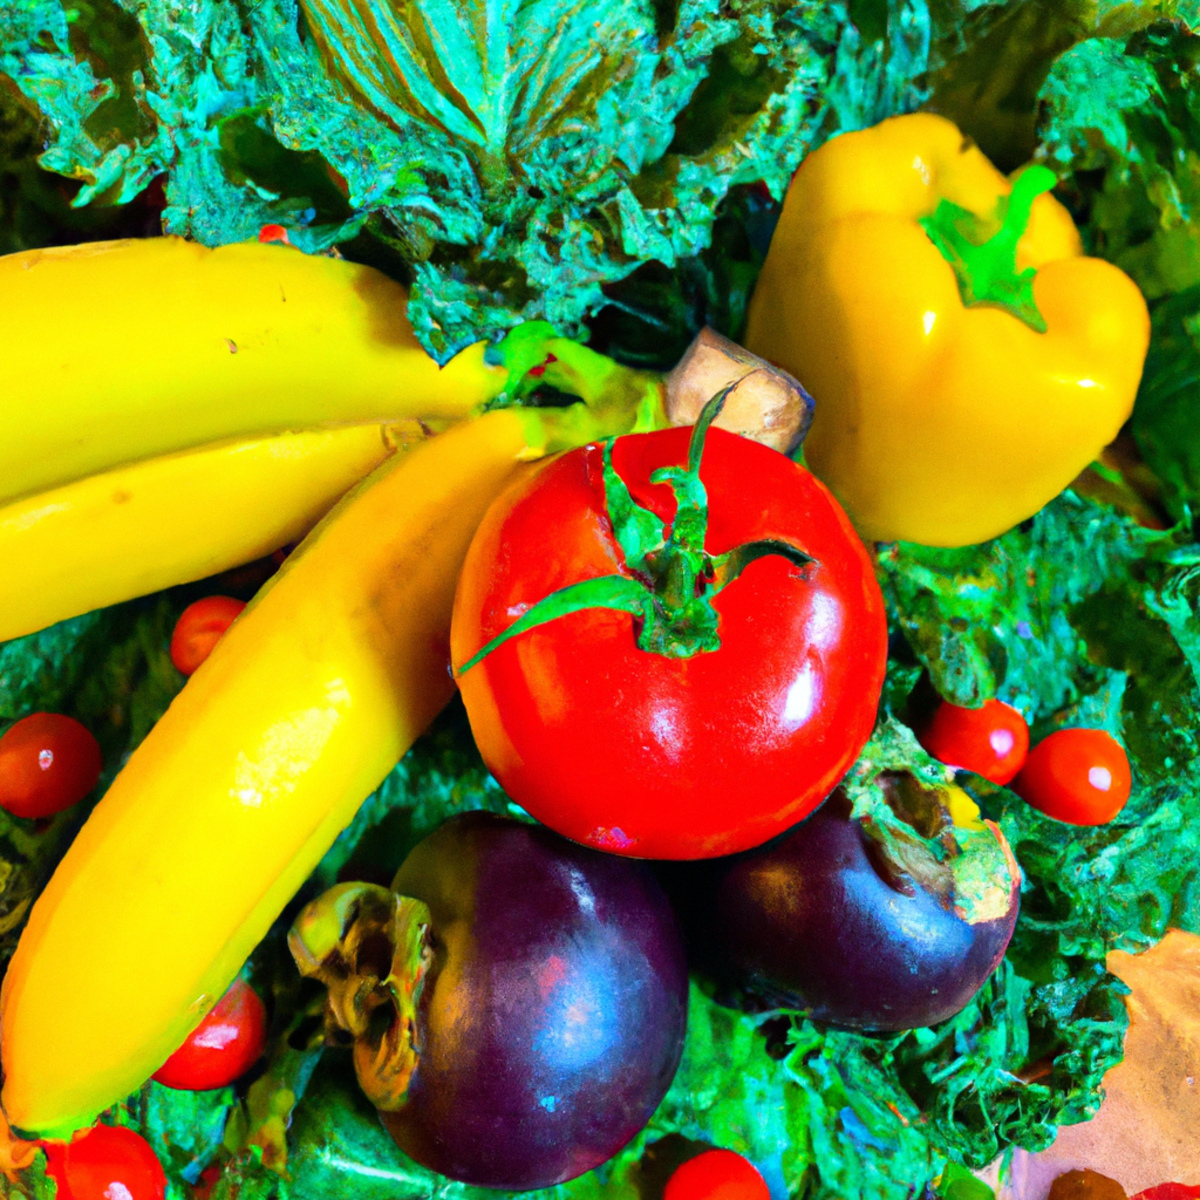 The photo captures a colorful array of fresh fruits and vegetables arranged in a beautiful display. A vibrant red tomato sits next to a bunch of leafy green kale, while a bright yellow bell pepper and a deep purple eggplant add pops of color to the scene. A handful of juicy strawberries and a bunch of ripe bananas complete the picture. The natural beauty of the produce is highlighted by the soft lighting and the simple, uncluttered background. This photo perfectly captures the essence of the article's message about the power of plants and the benefits of a plant-based diet for heart health.